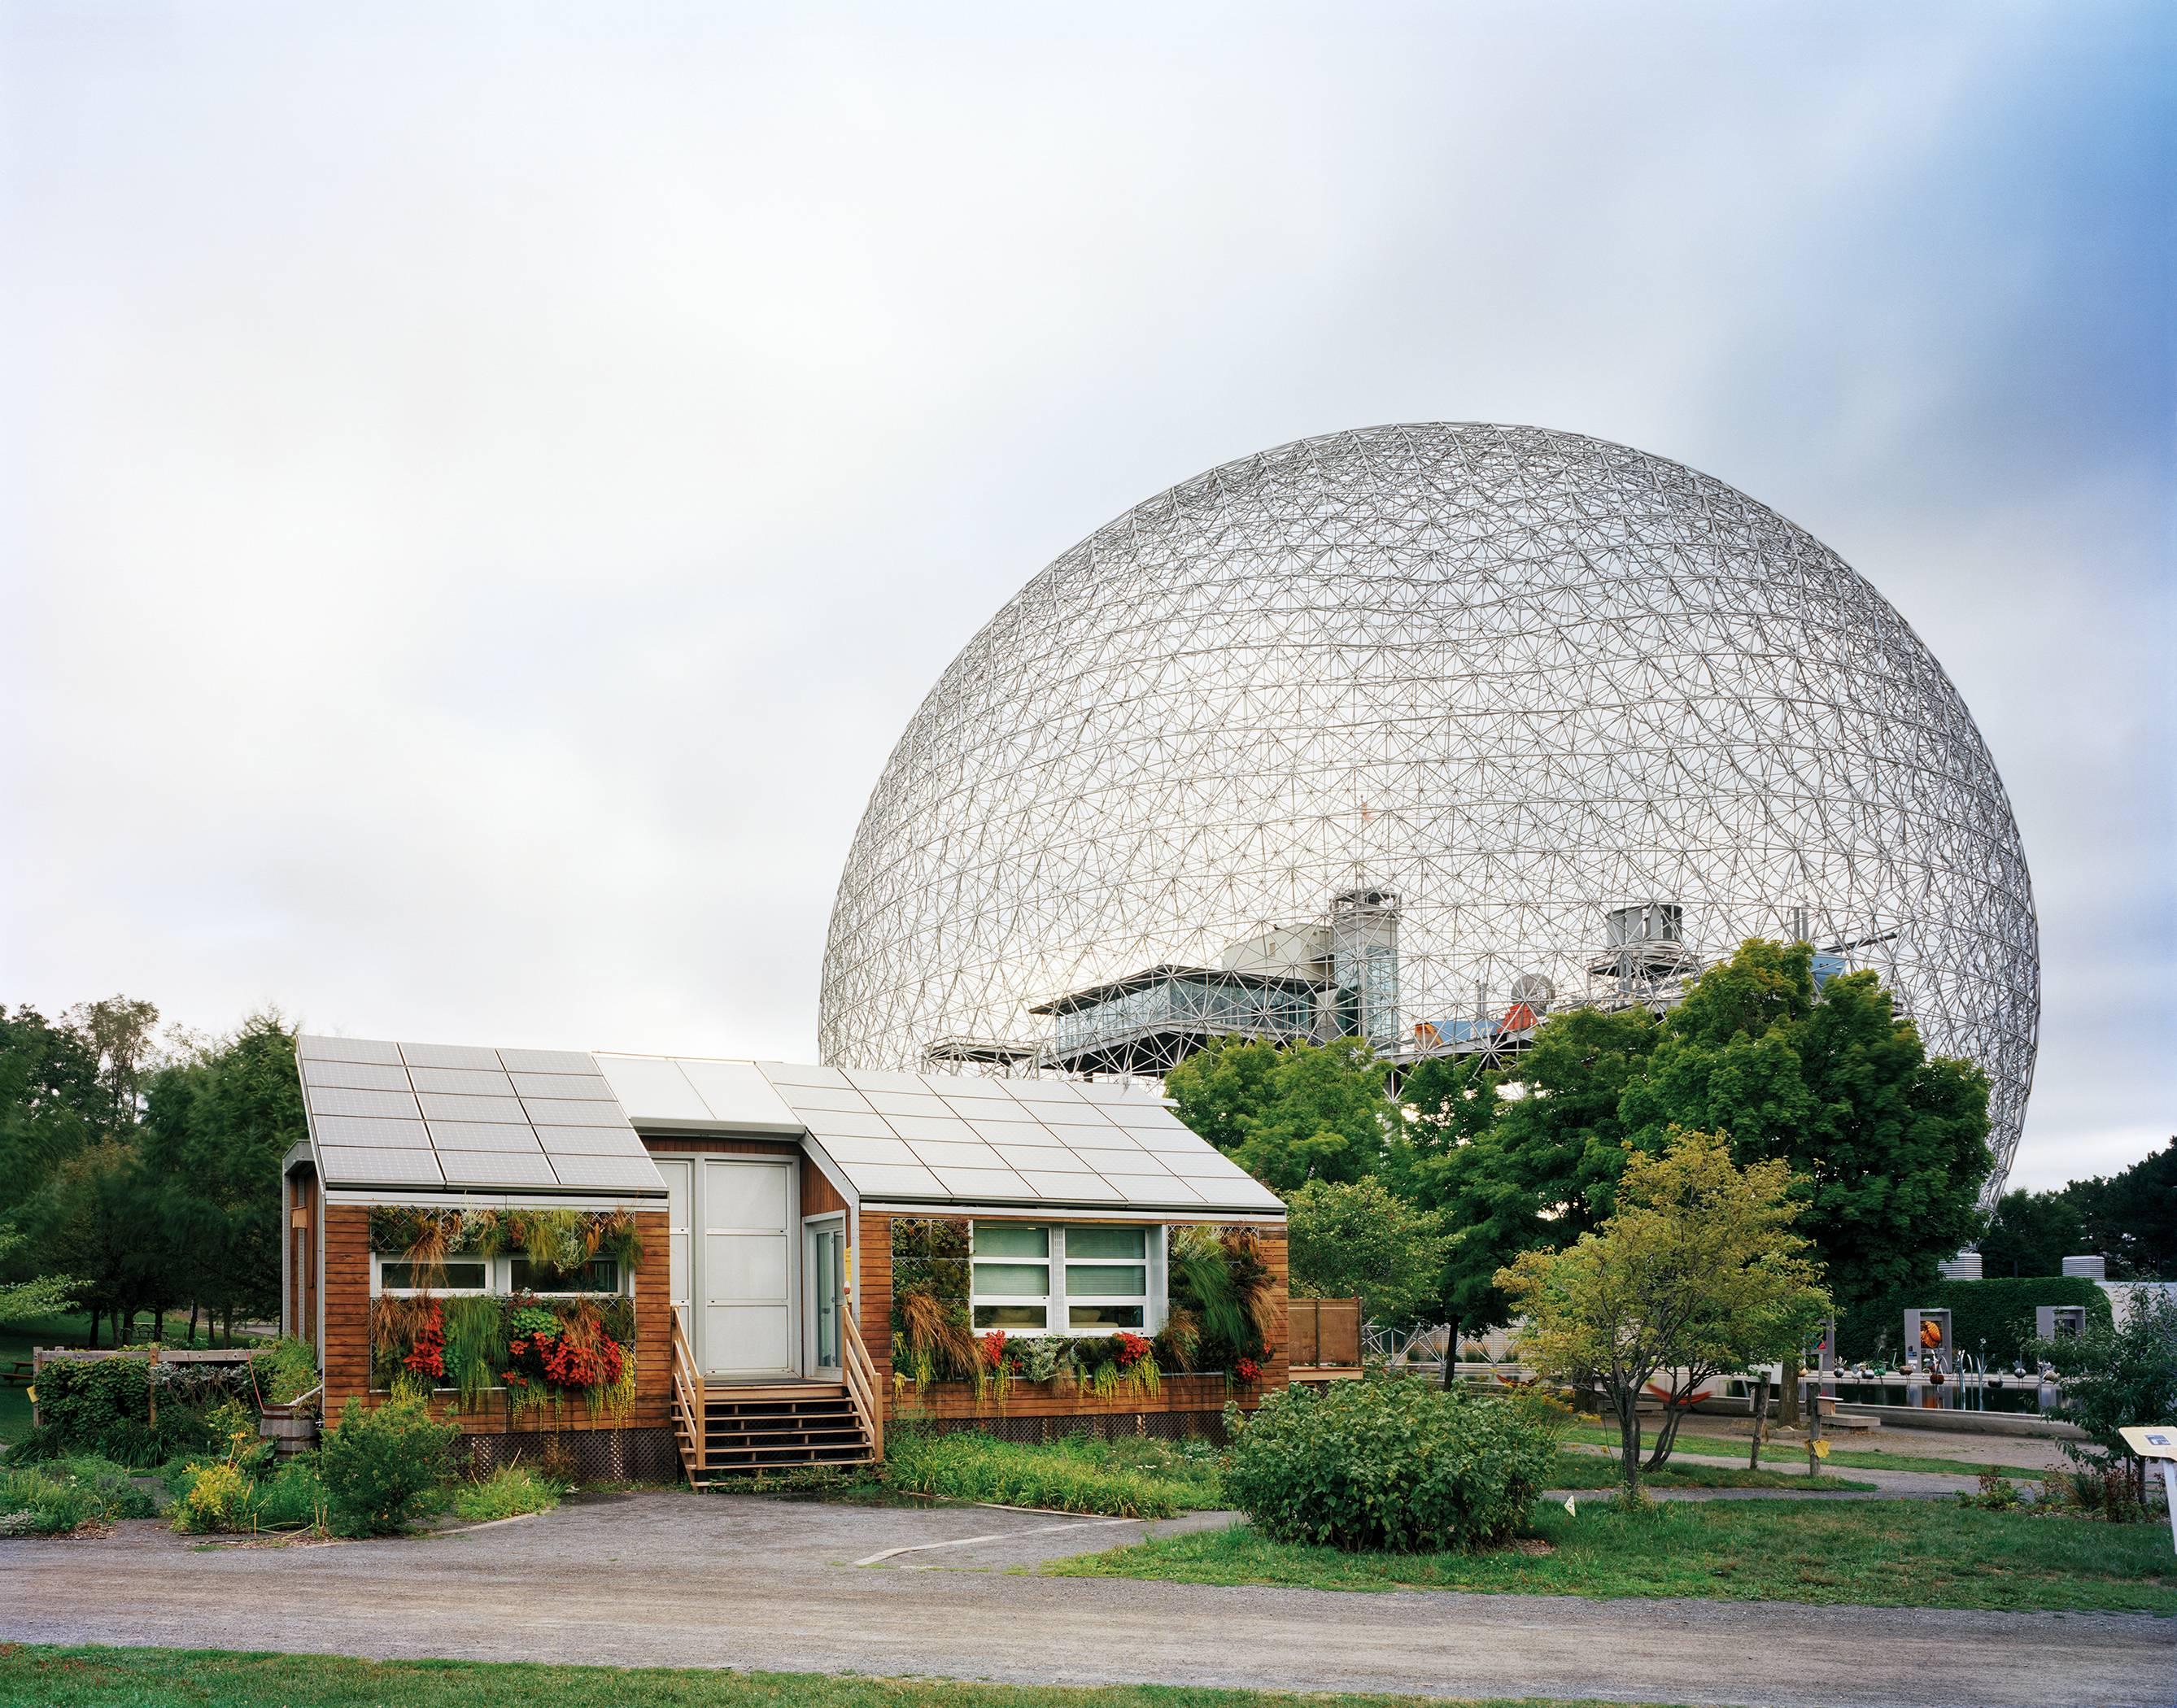 Jade Doskow Landscape Photograph - Montreal 1967 World's Fair, "Man and His World, " 40"x50" photograph